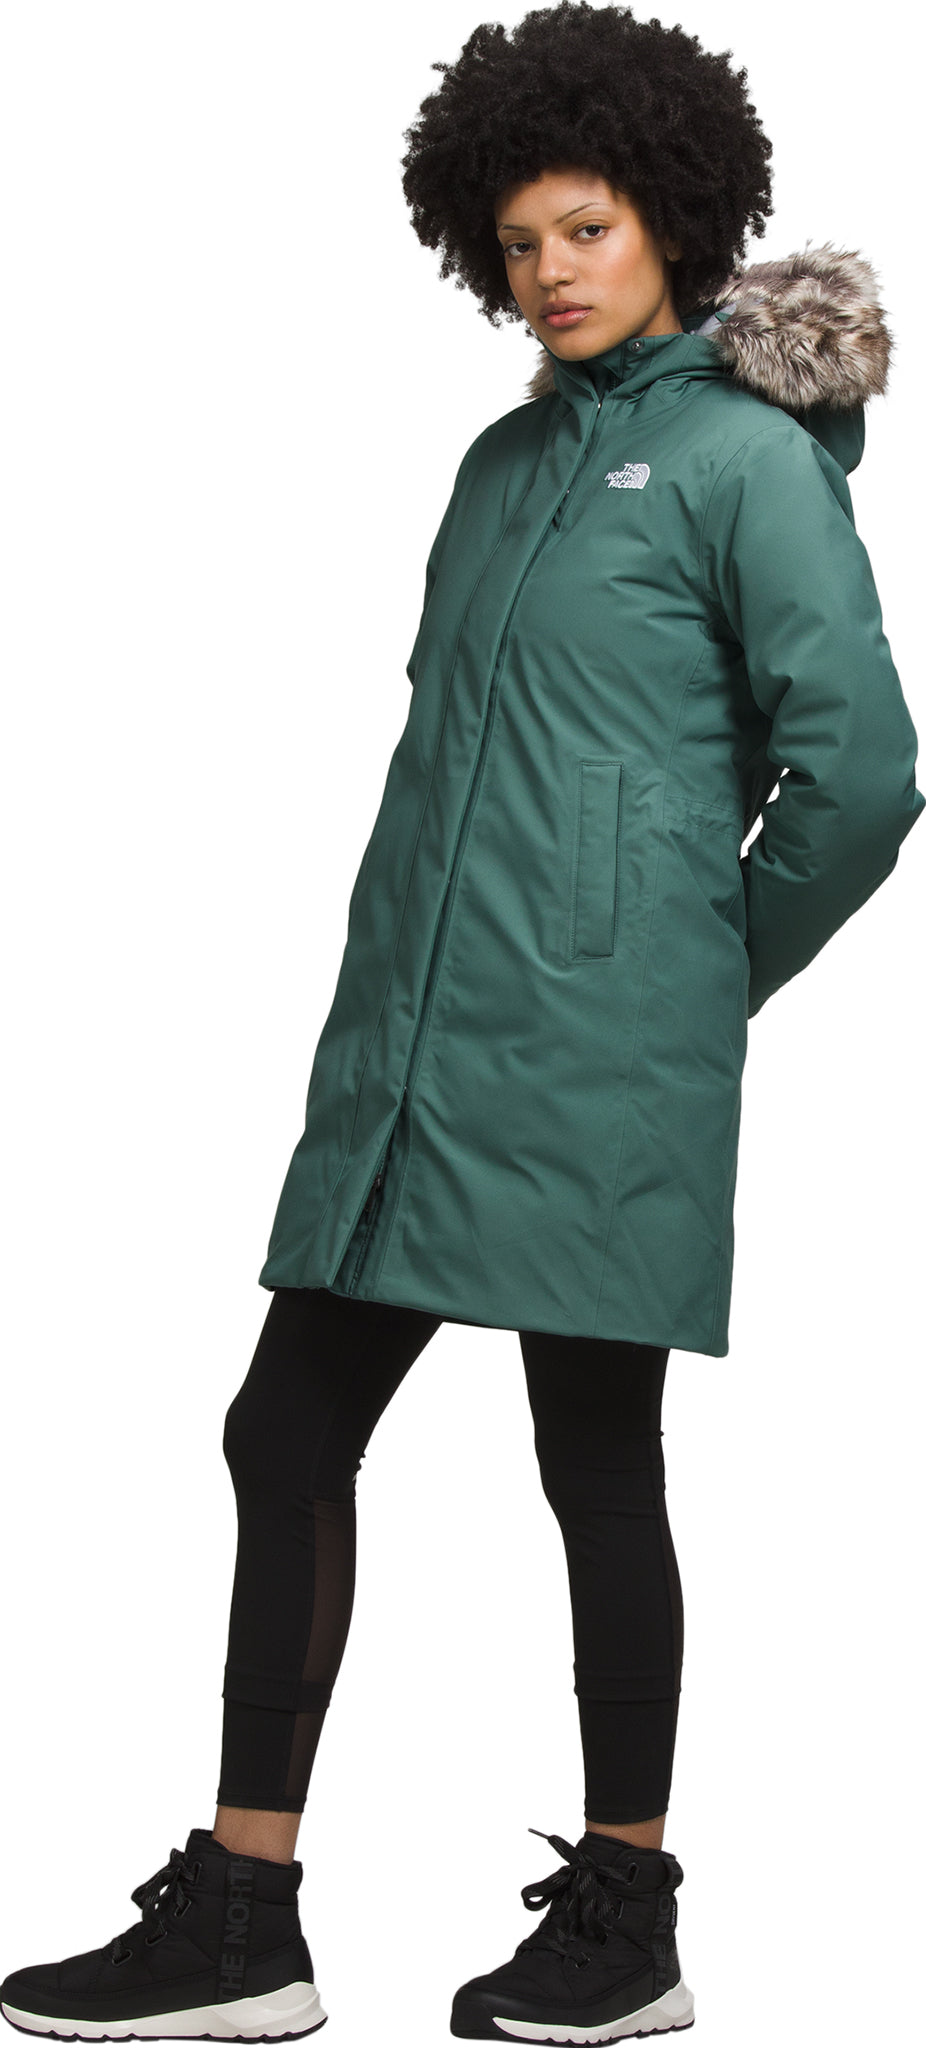 The North Face Arctic Parka Women S Altitude Sports